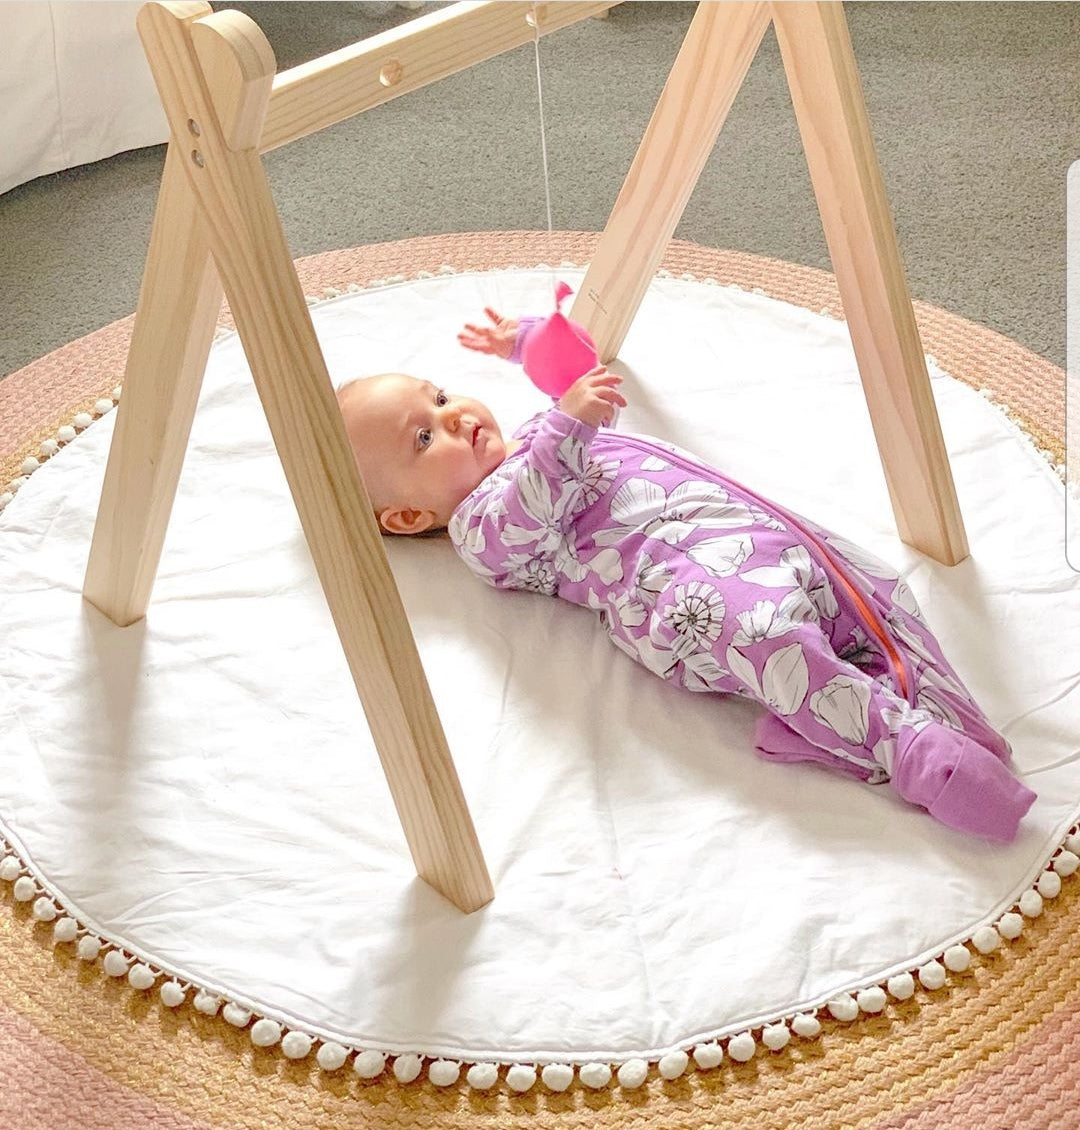 How To: Entertain Your Baby at Home